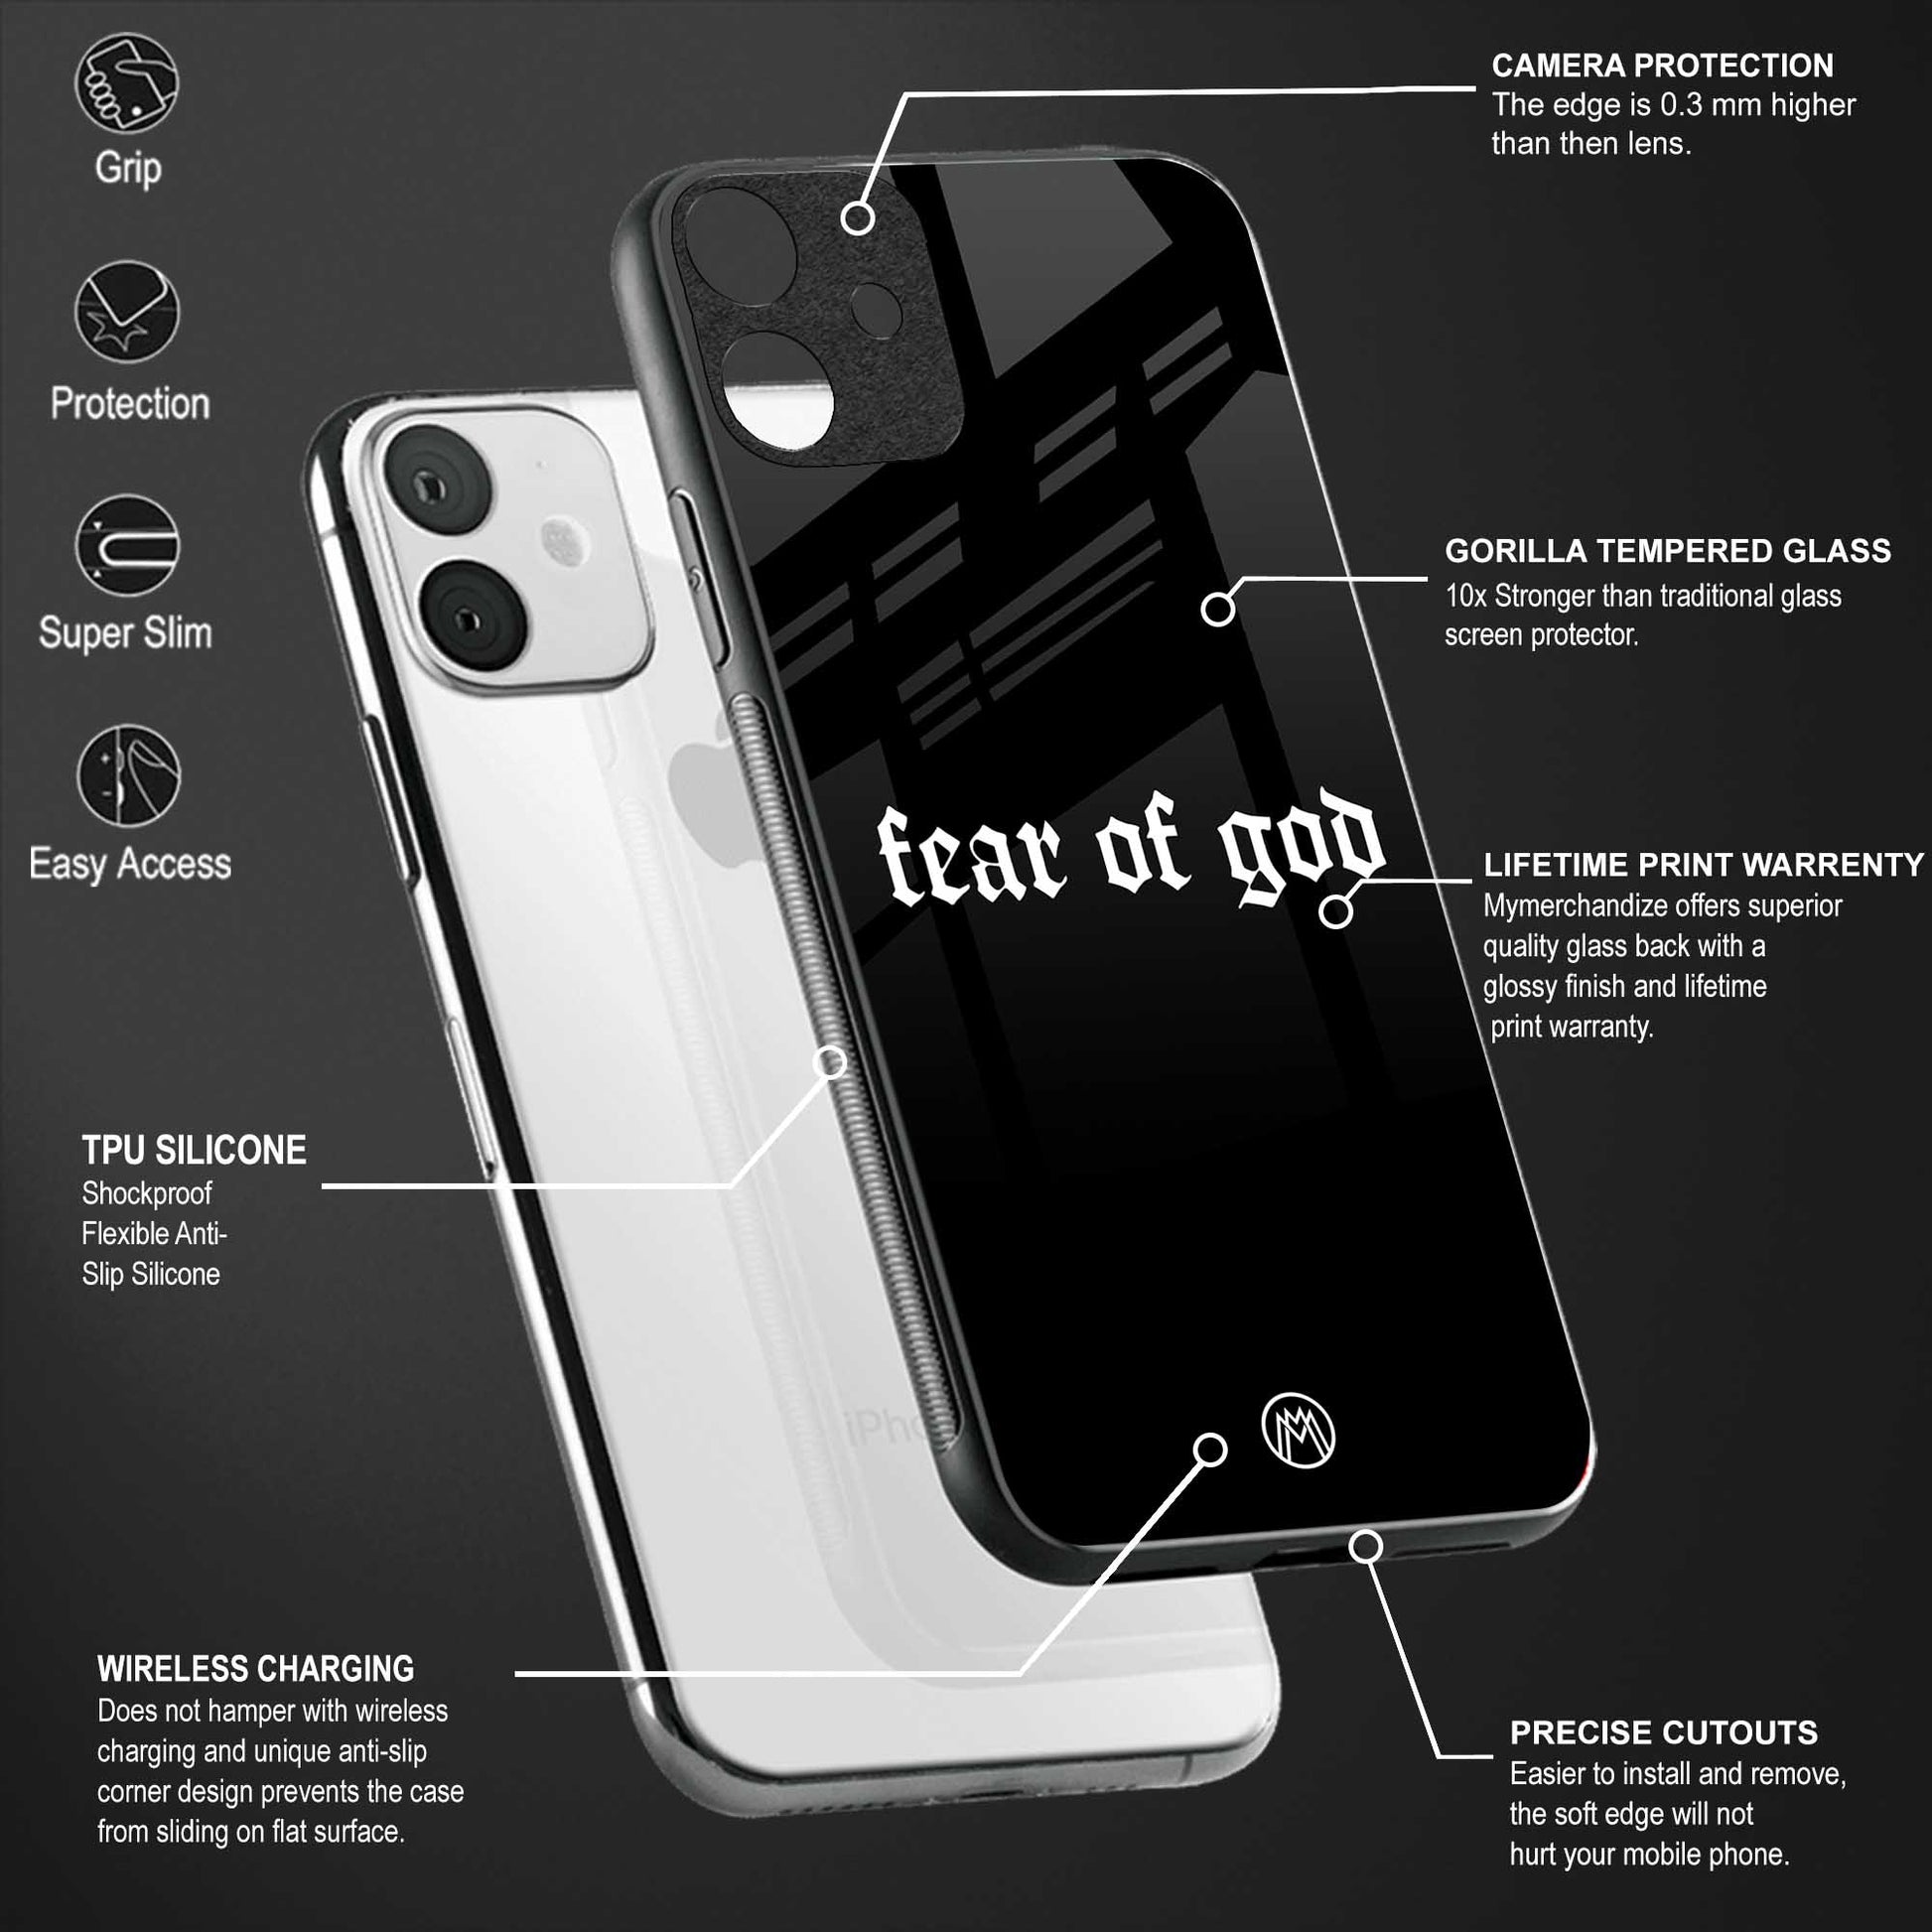 fear of god phone cover for vivo y12